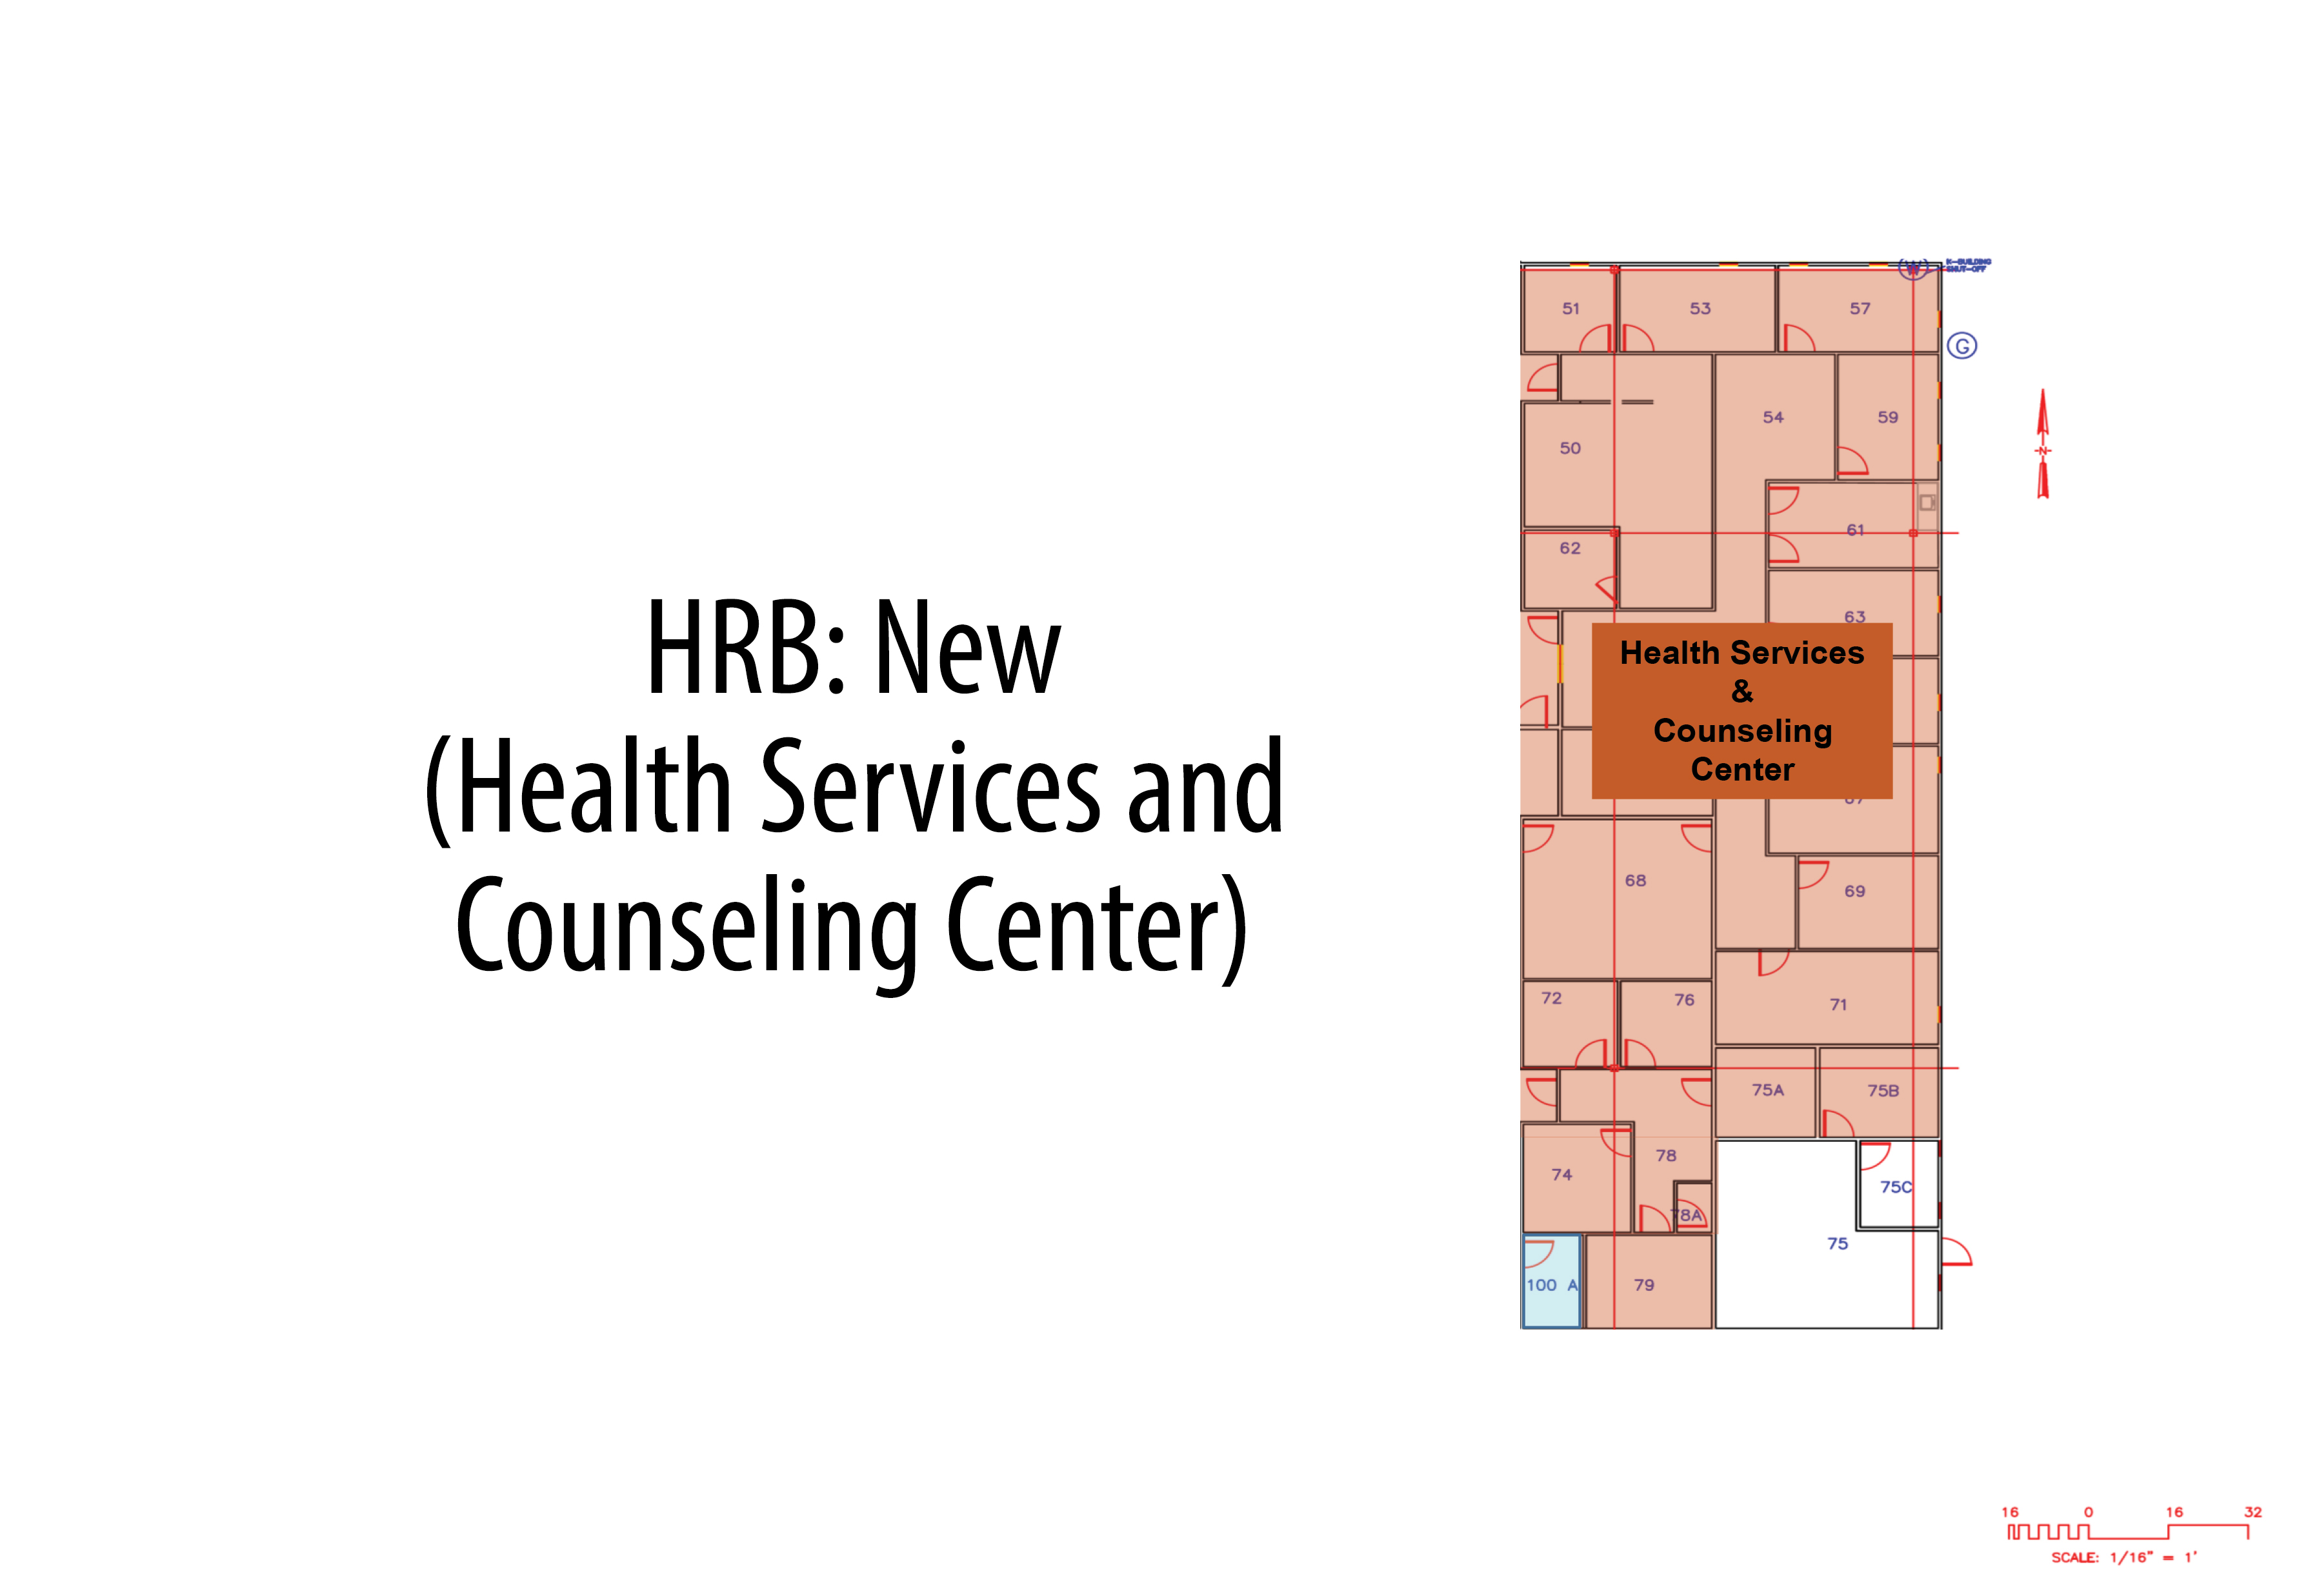 New HRB Blueprint for Health Services and Counseling Center